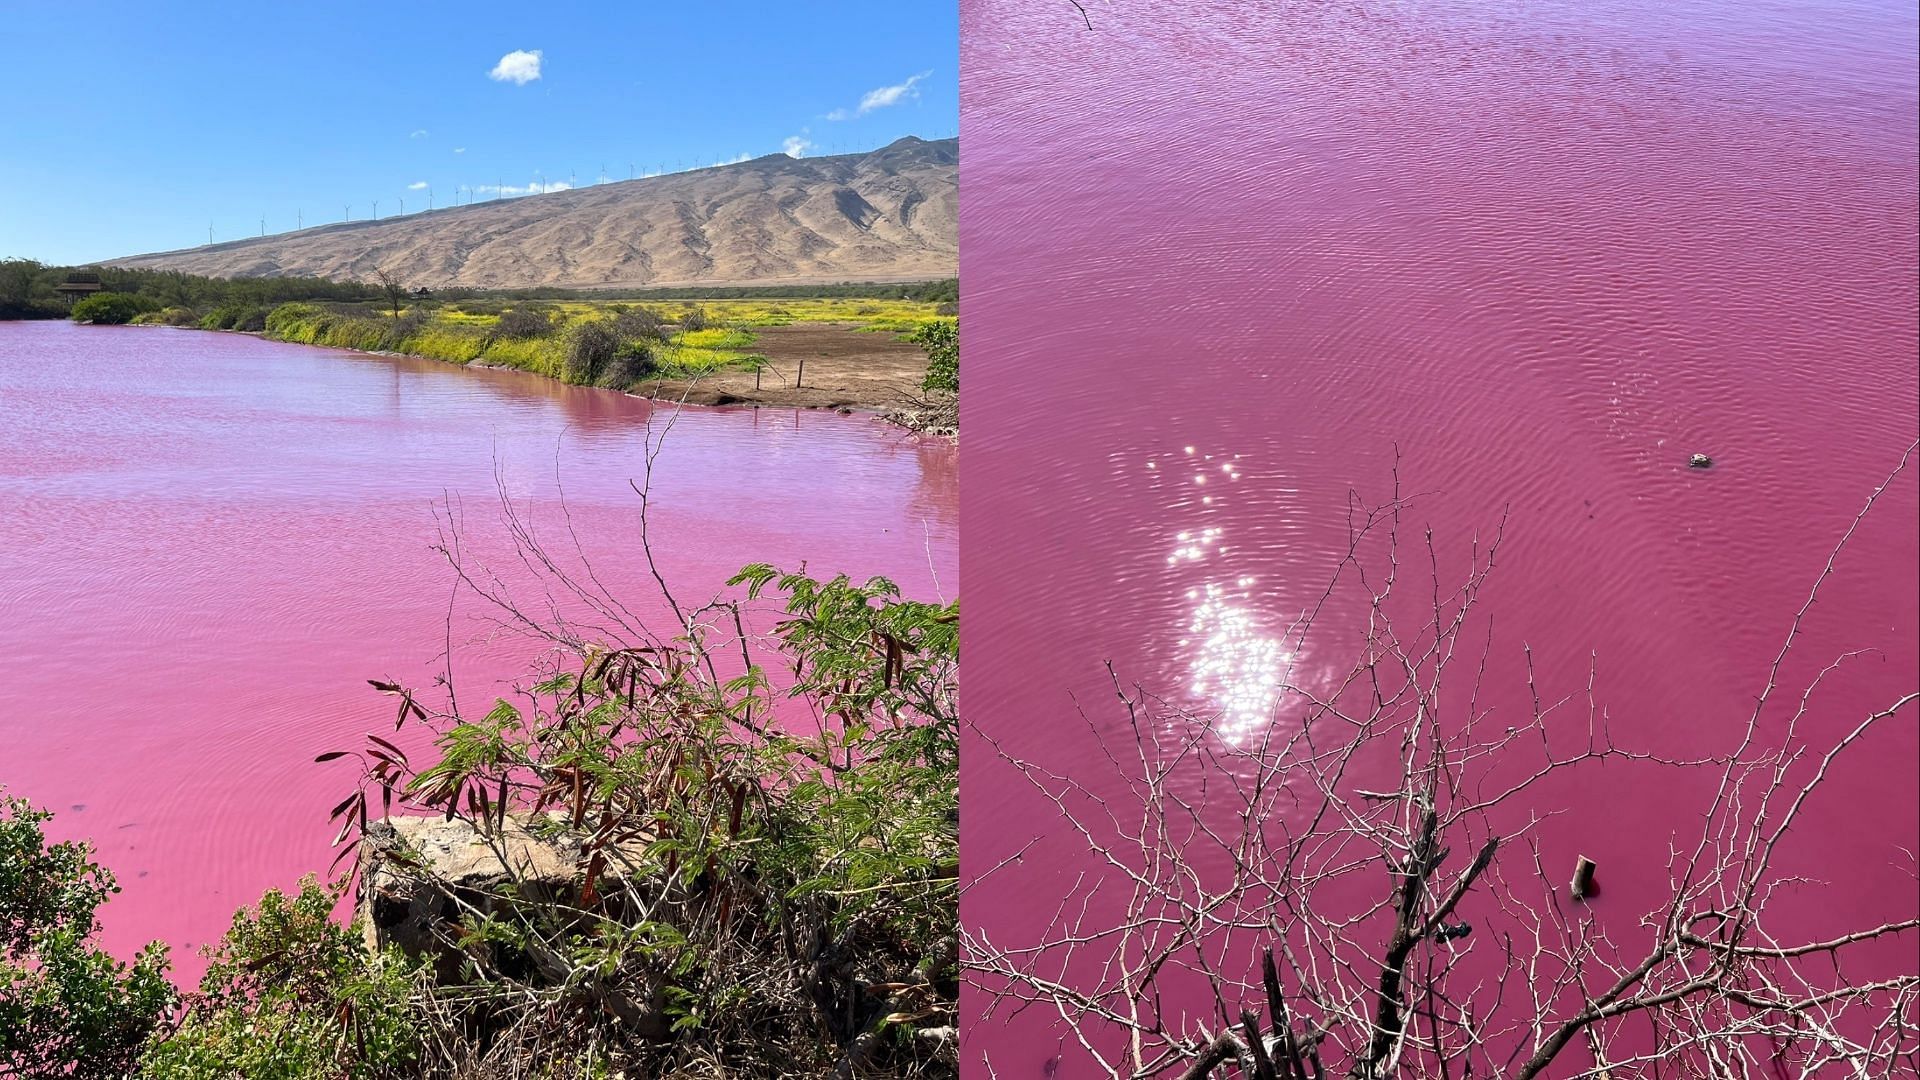 Pink water at Keālia Pond on Maui likely due to halobacteria growth from  high salinity : Maui Now